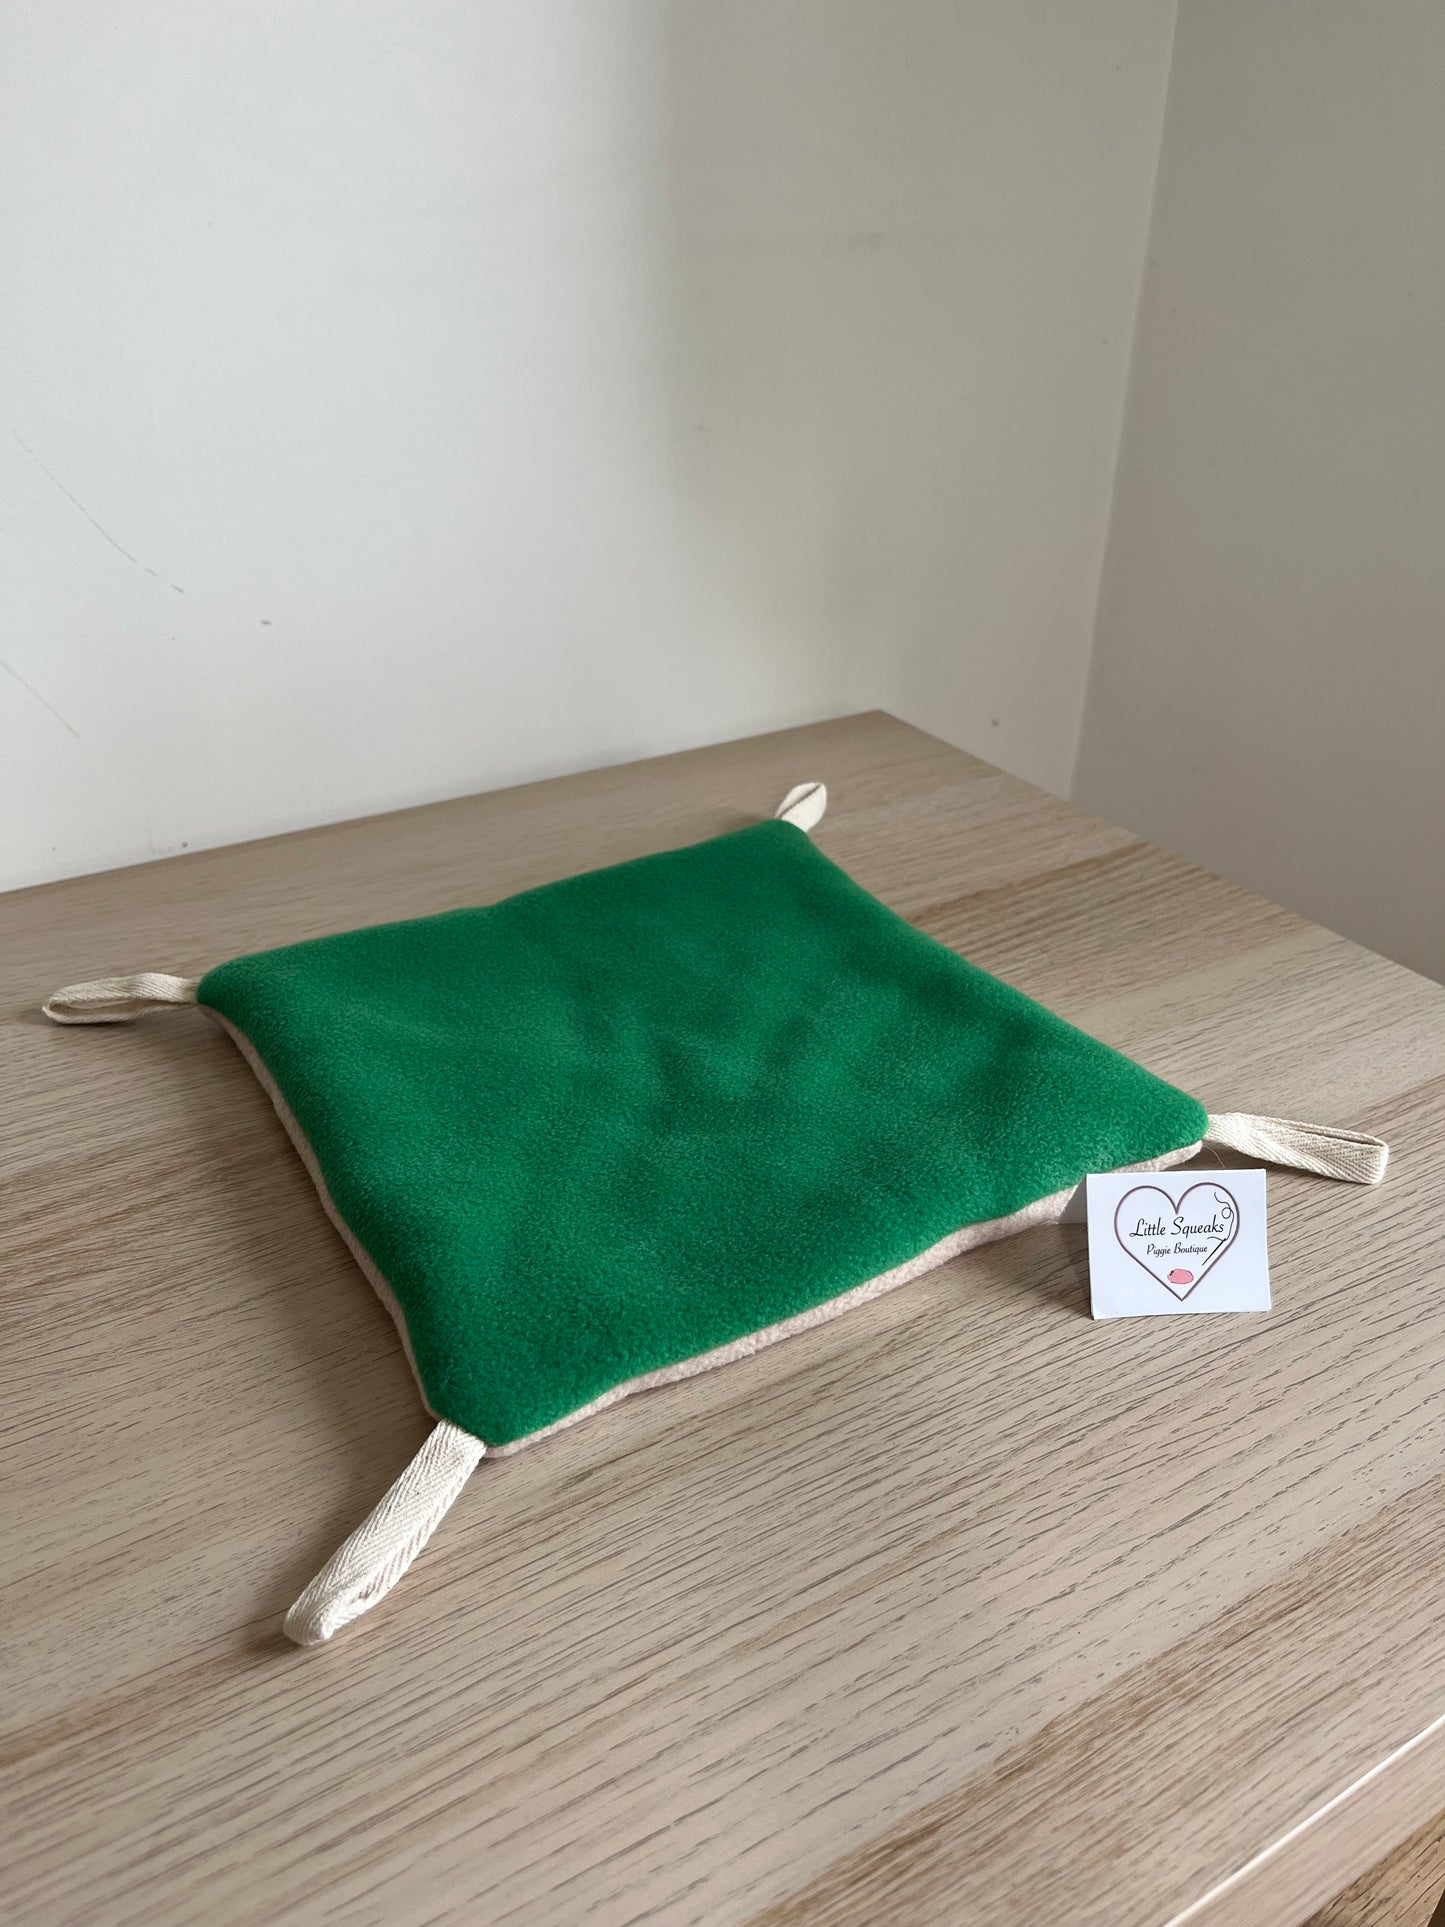 Hammock Stand Pad for Guinea Pigs (Enchanted Hedgehog Collection)